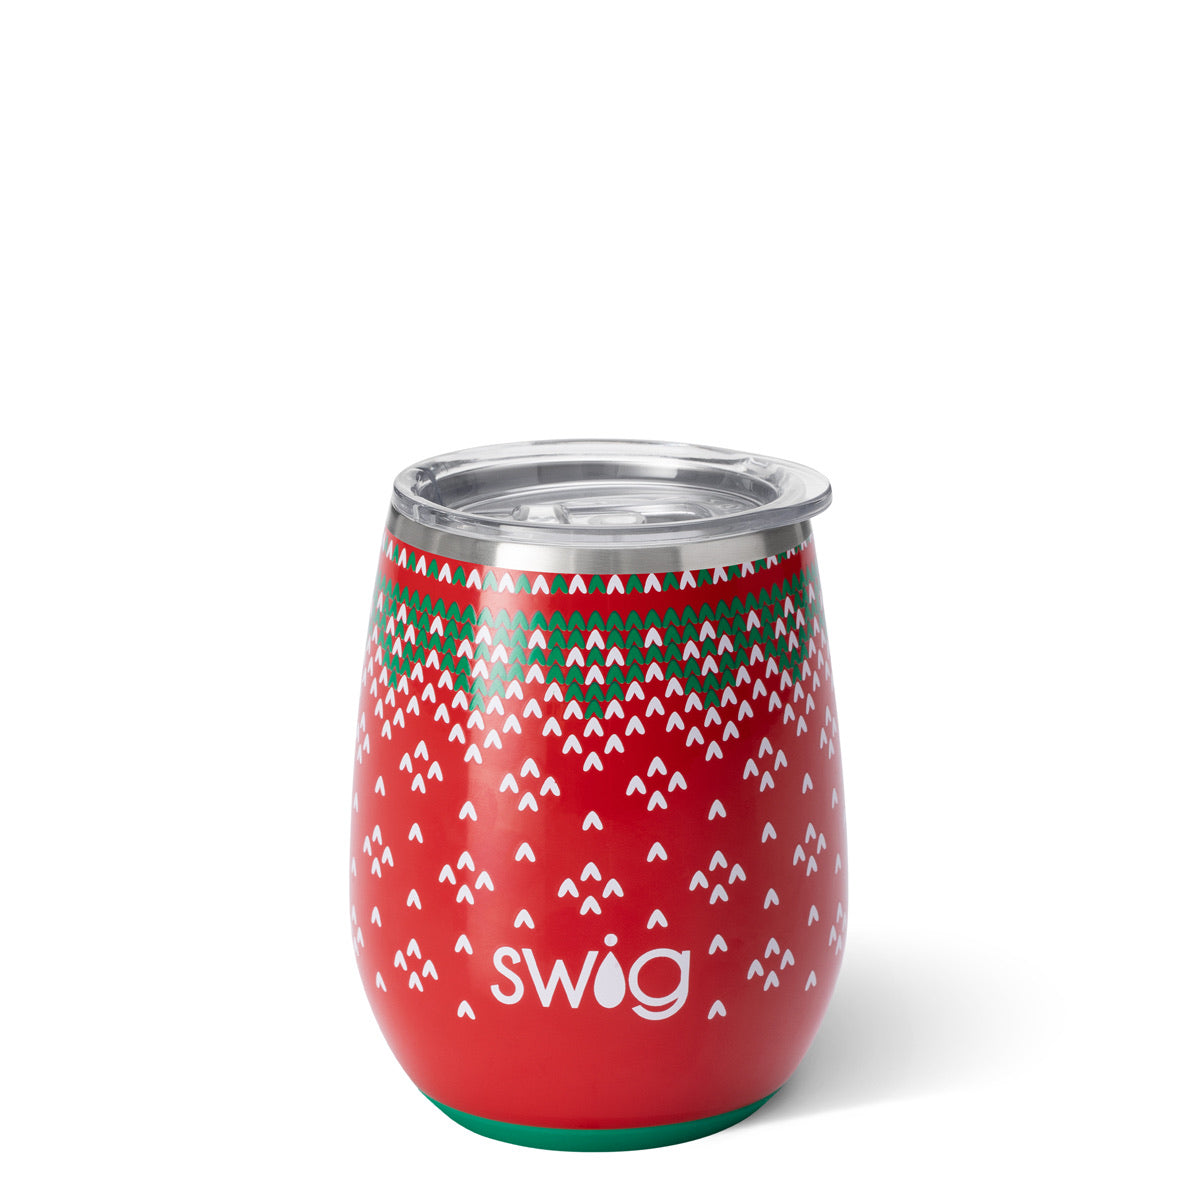 Swig Life 14oz Insulated Wine Tumbler with Lid | Christmas Wine Glasses  with Festive Holiday Print |…See more Swig Life 14oz Insulated Wine Tumbler